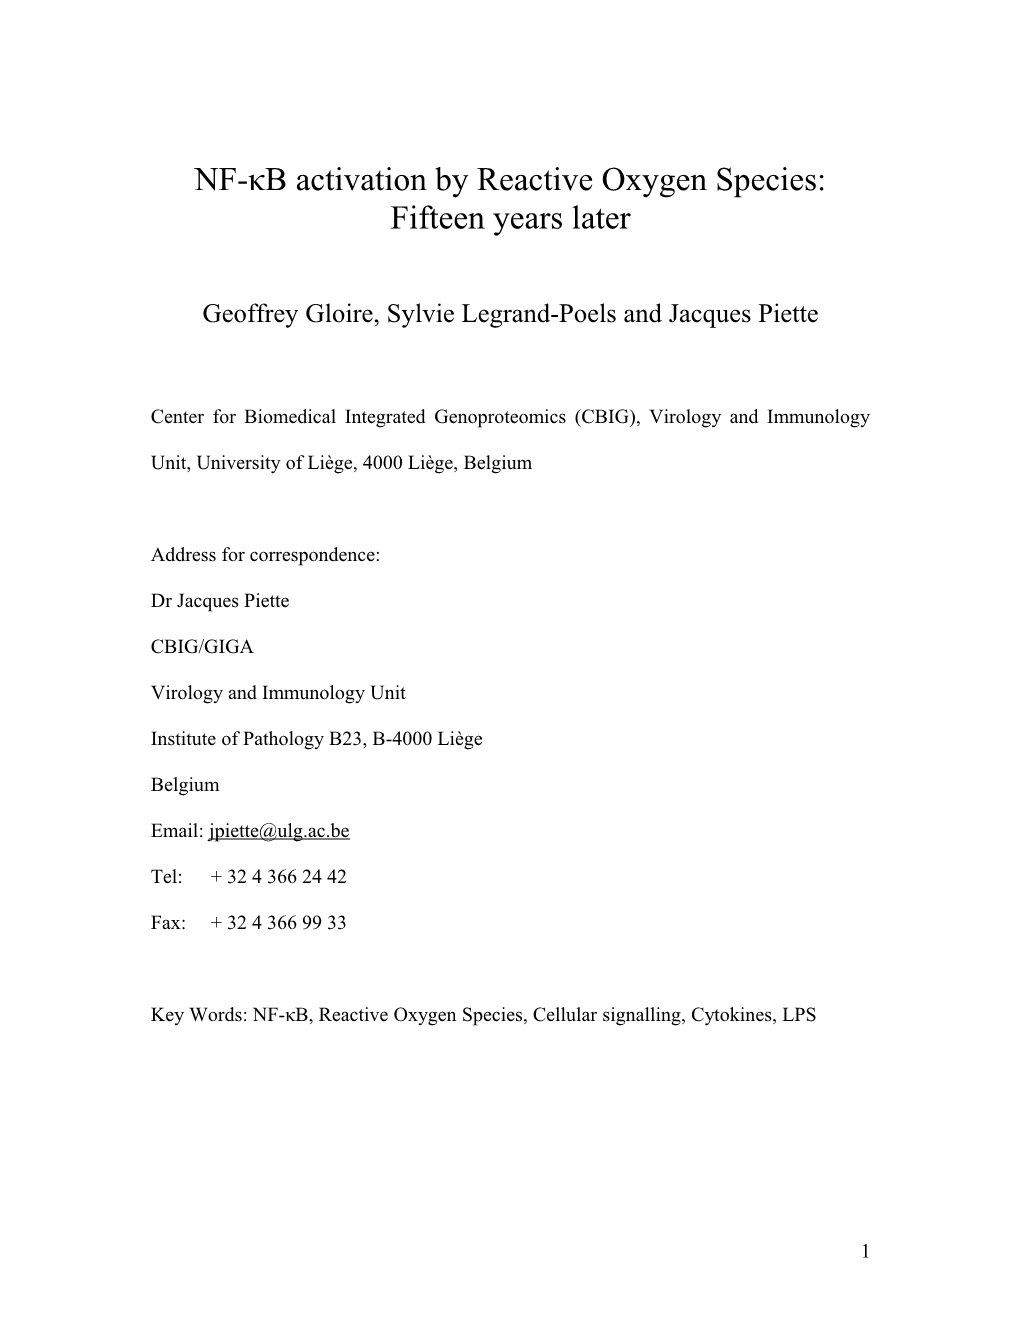 NF-Κb Activation by Reactive Oxygen Species: 15 Years Later